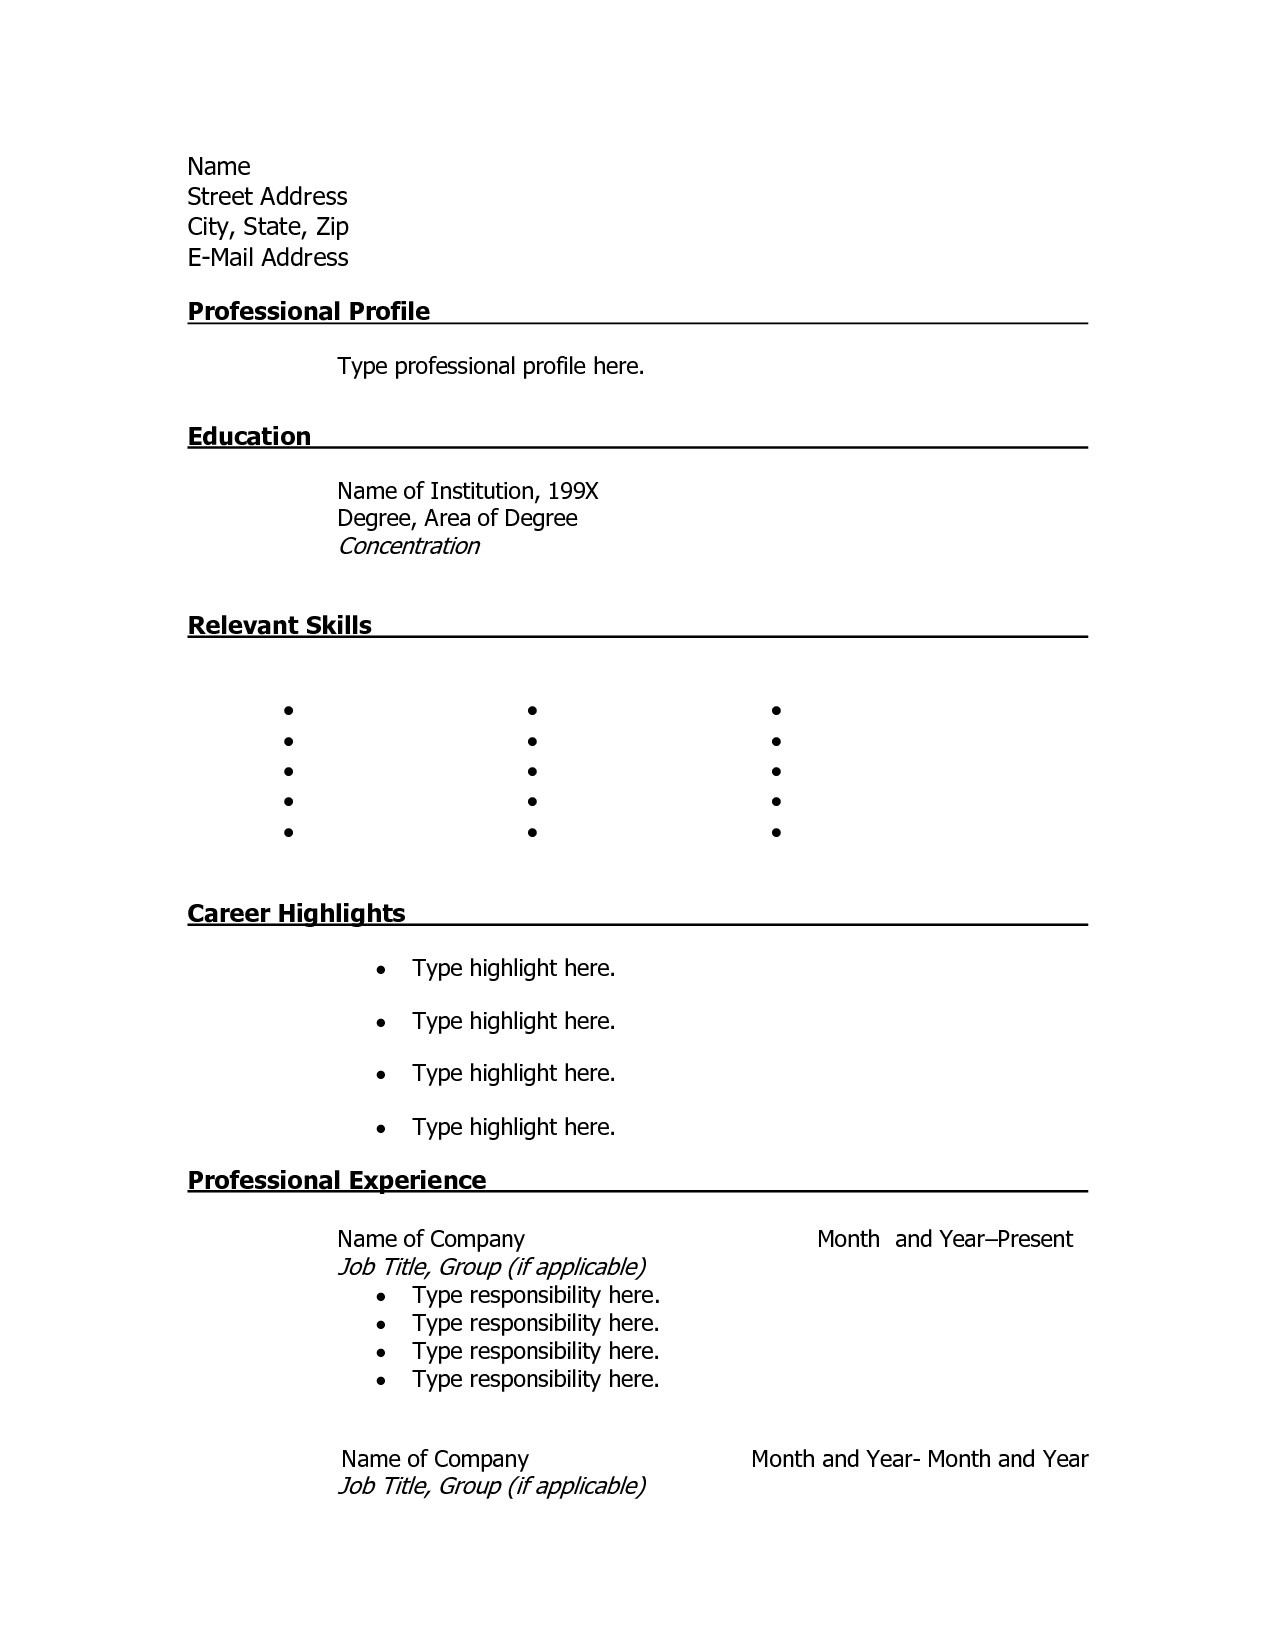 Resume Template For High School Students Free Printable Resume - Free Printable Fill In The Blank Resume Templates